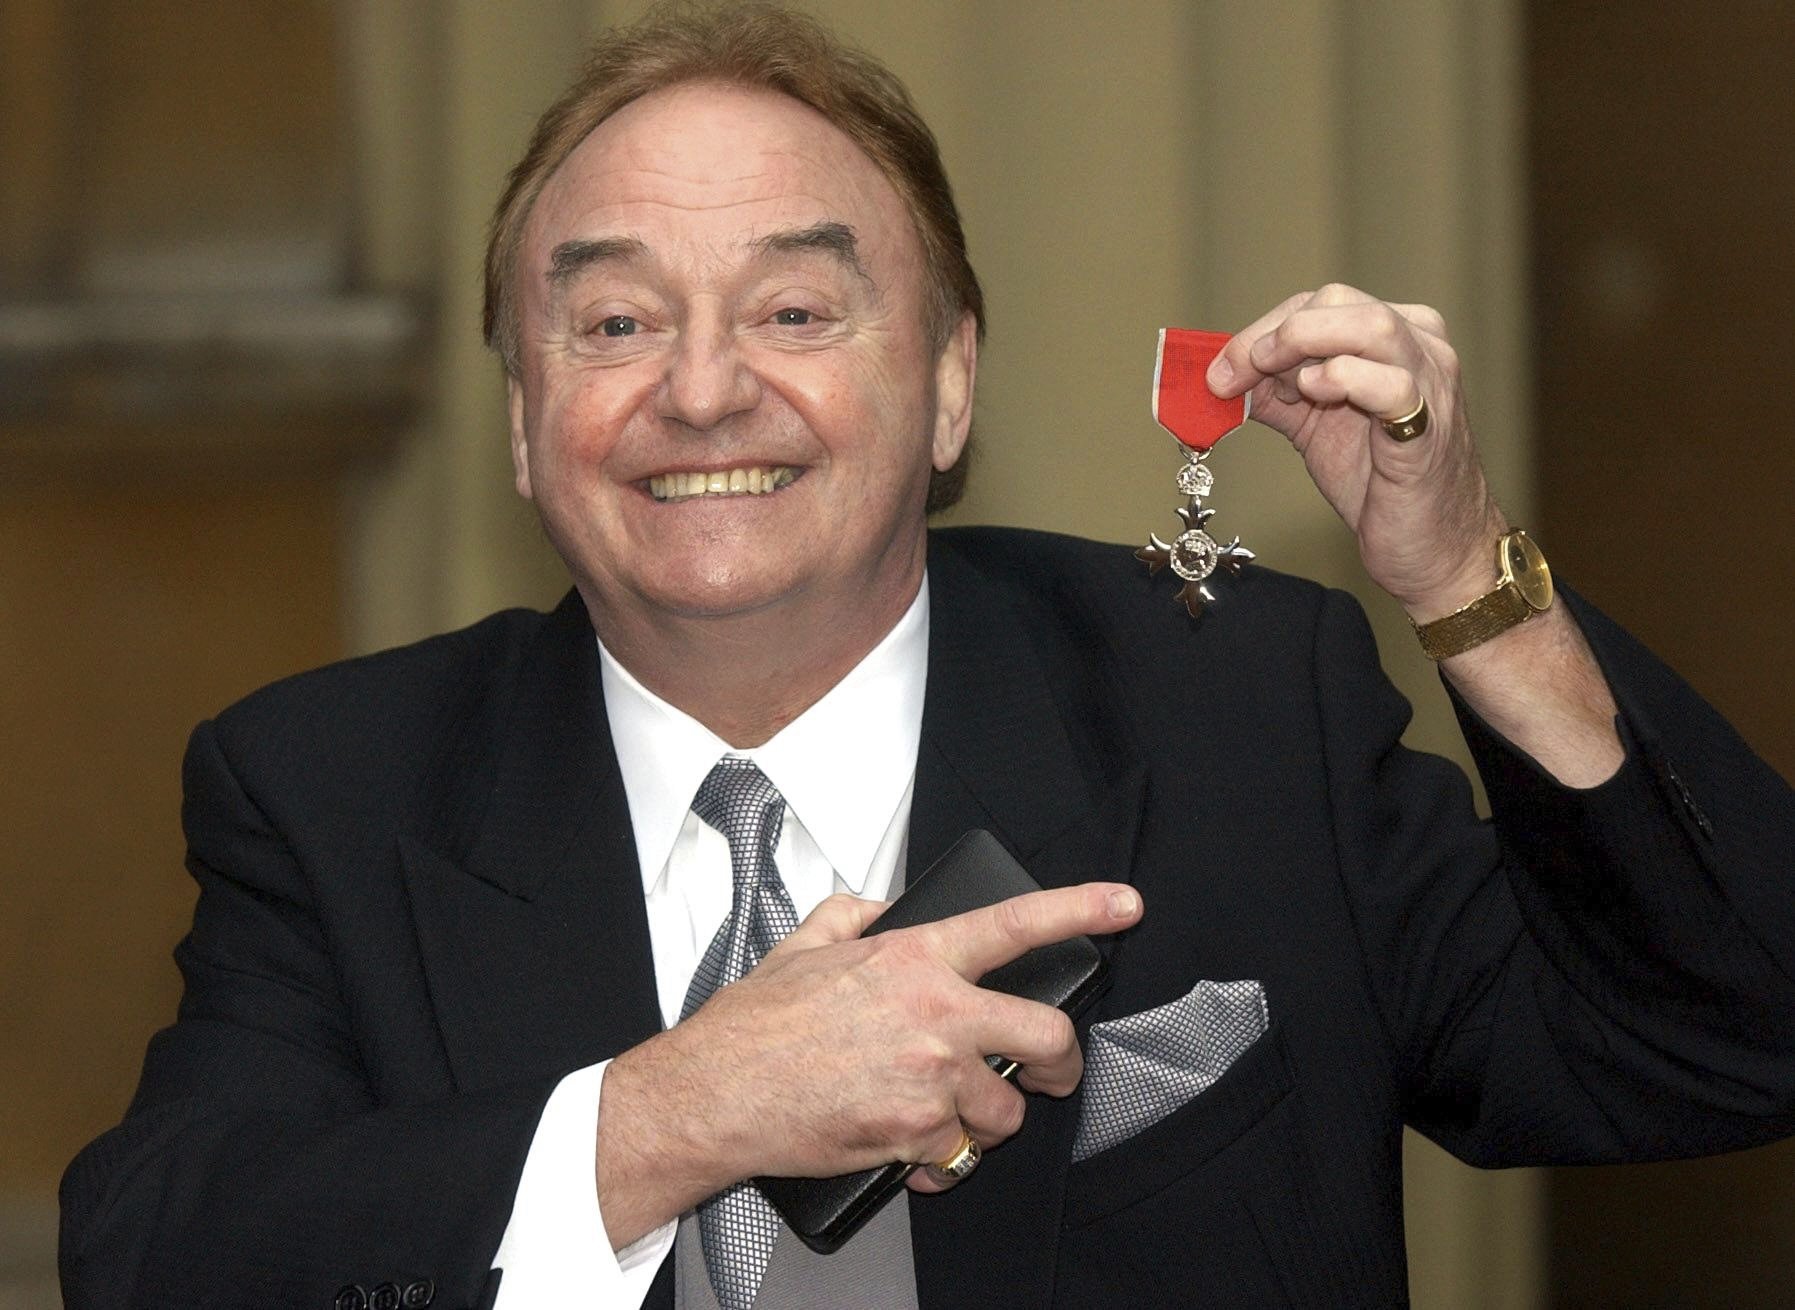 ‘You will never walk alone’: singer Gerry Marsden dies at 78